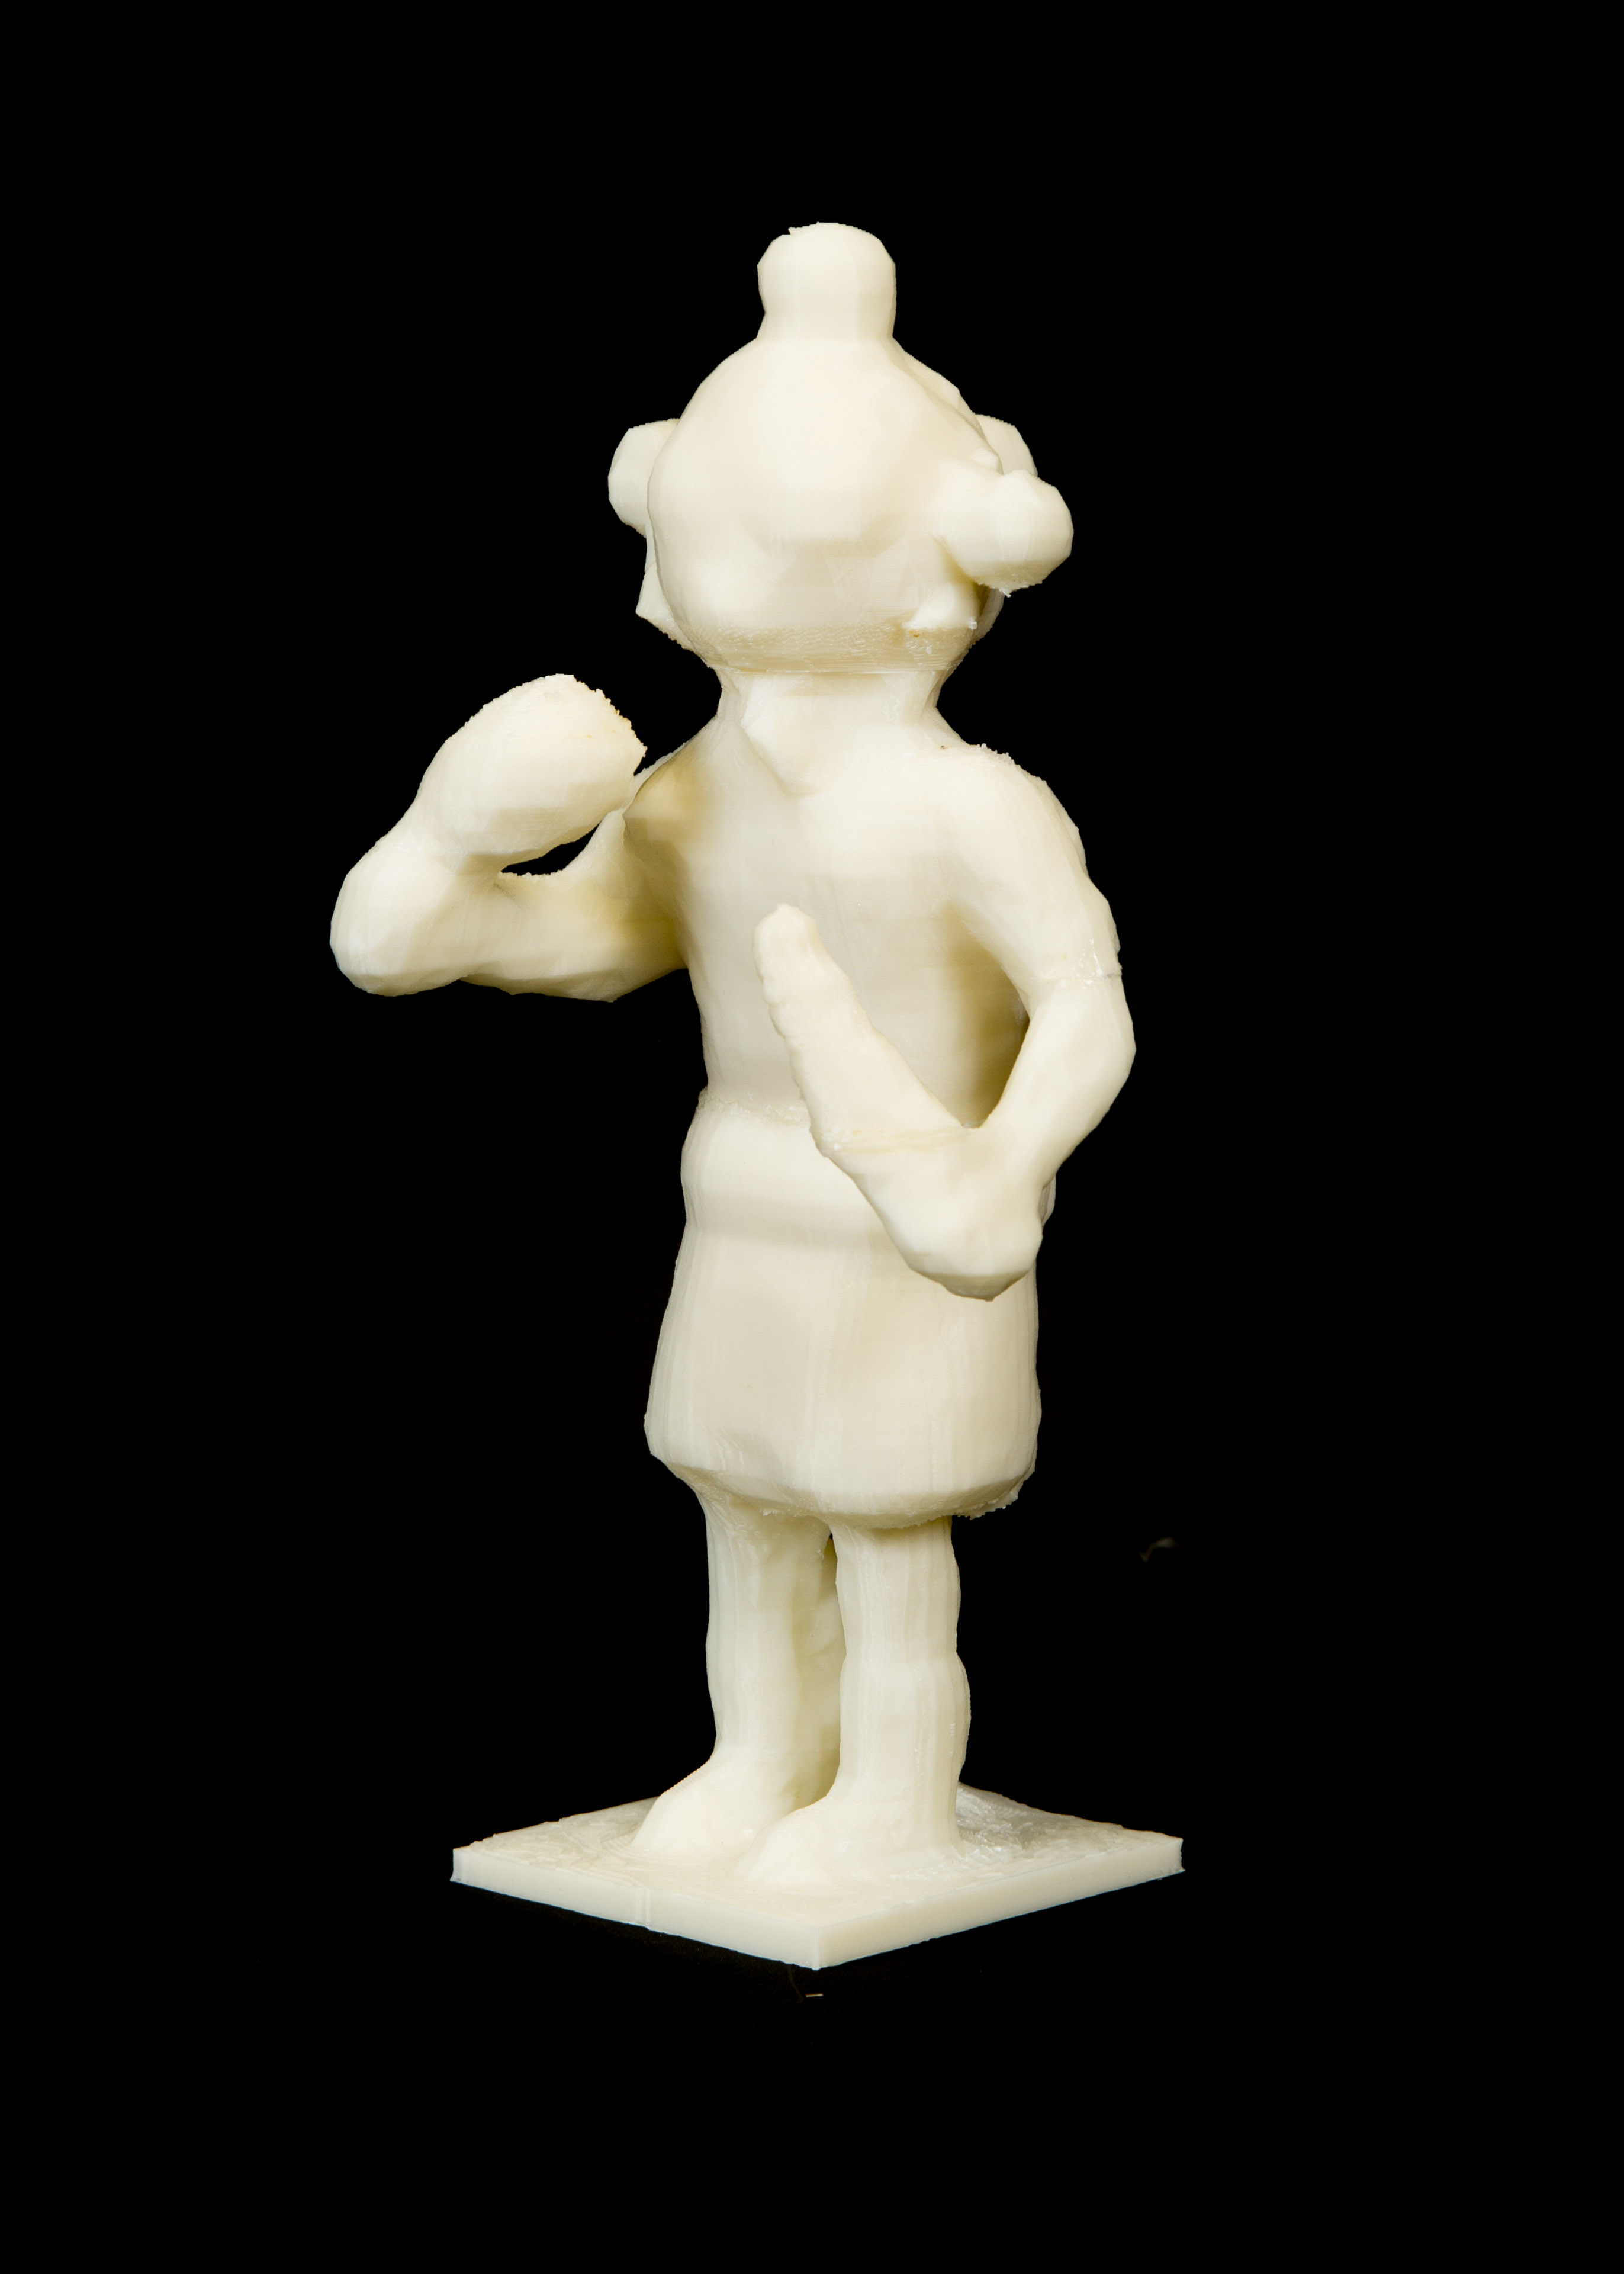 A white plastic figurine of a mudhead clown. Four round bulbs are visible on the top, sides, and back of its head.